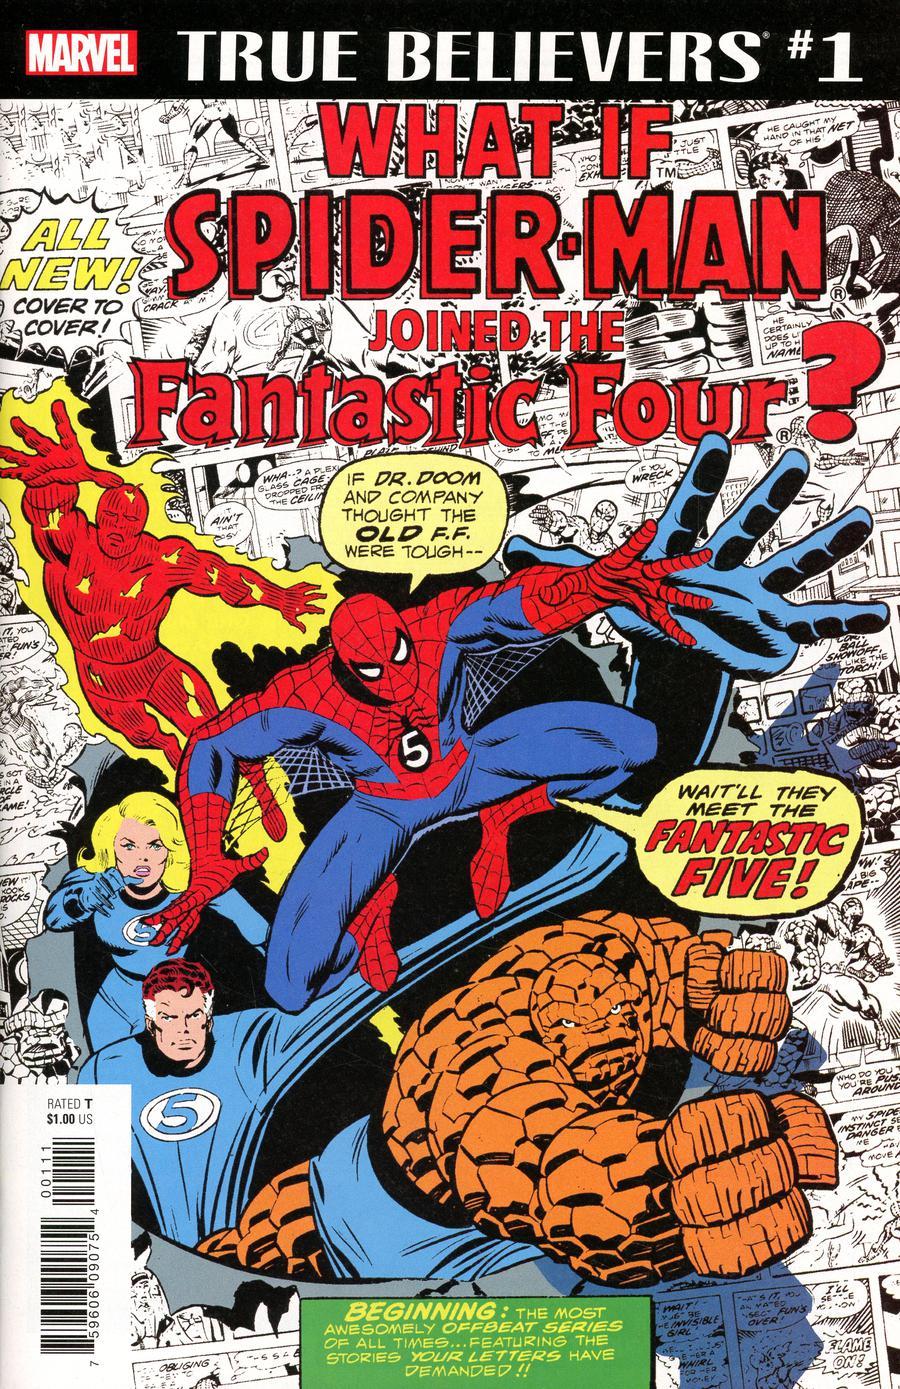 True Believers Fantastic Four What If Vol. 1 #1